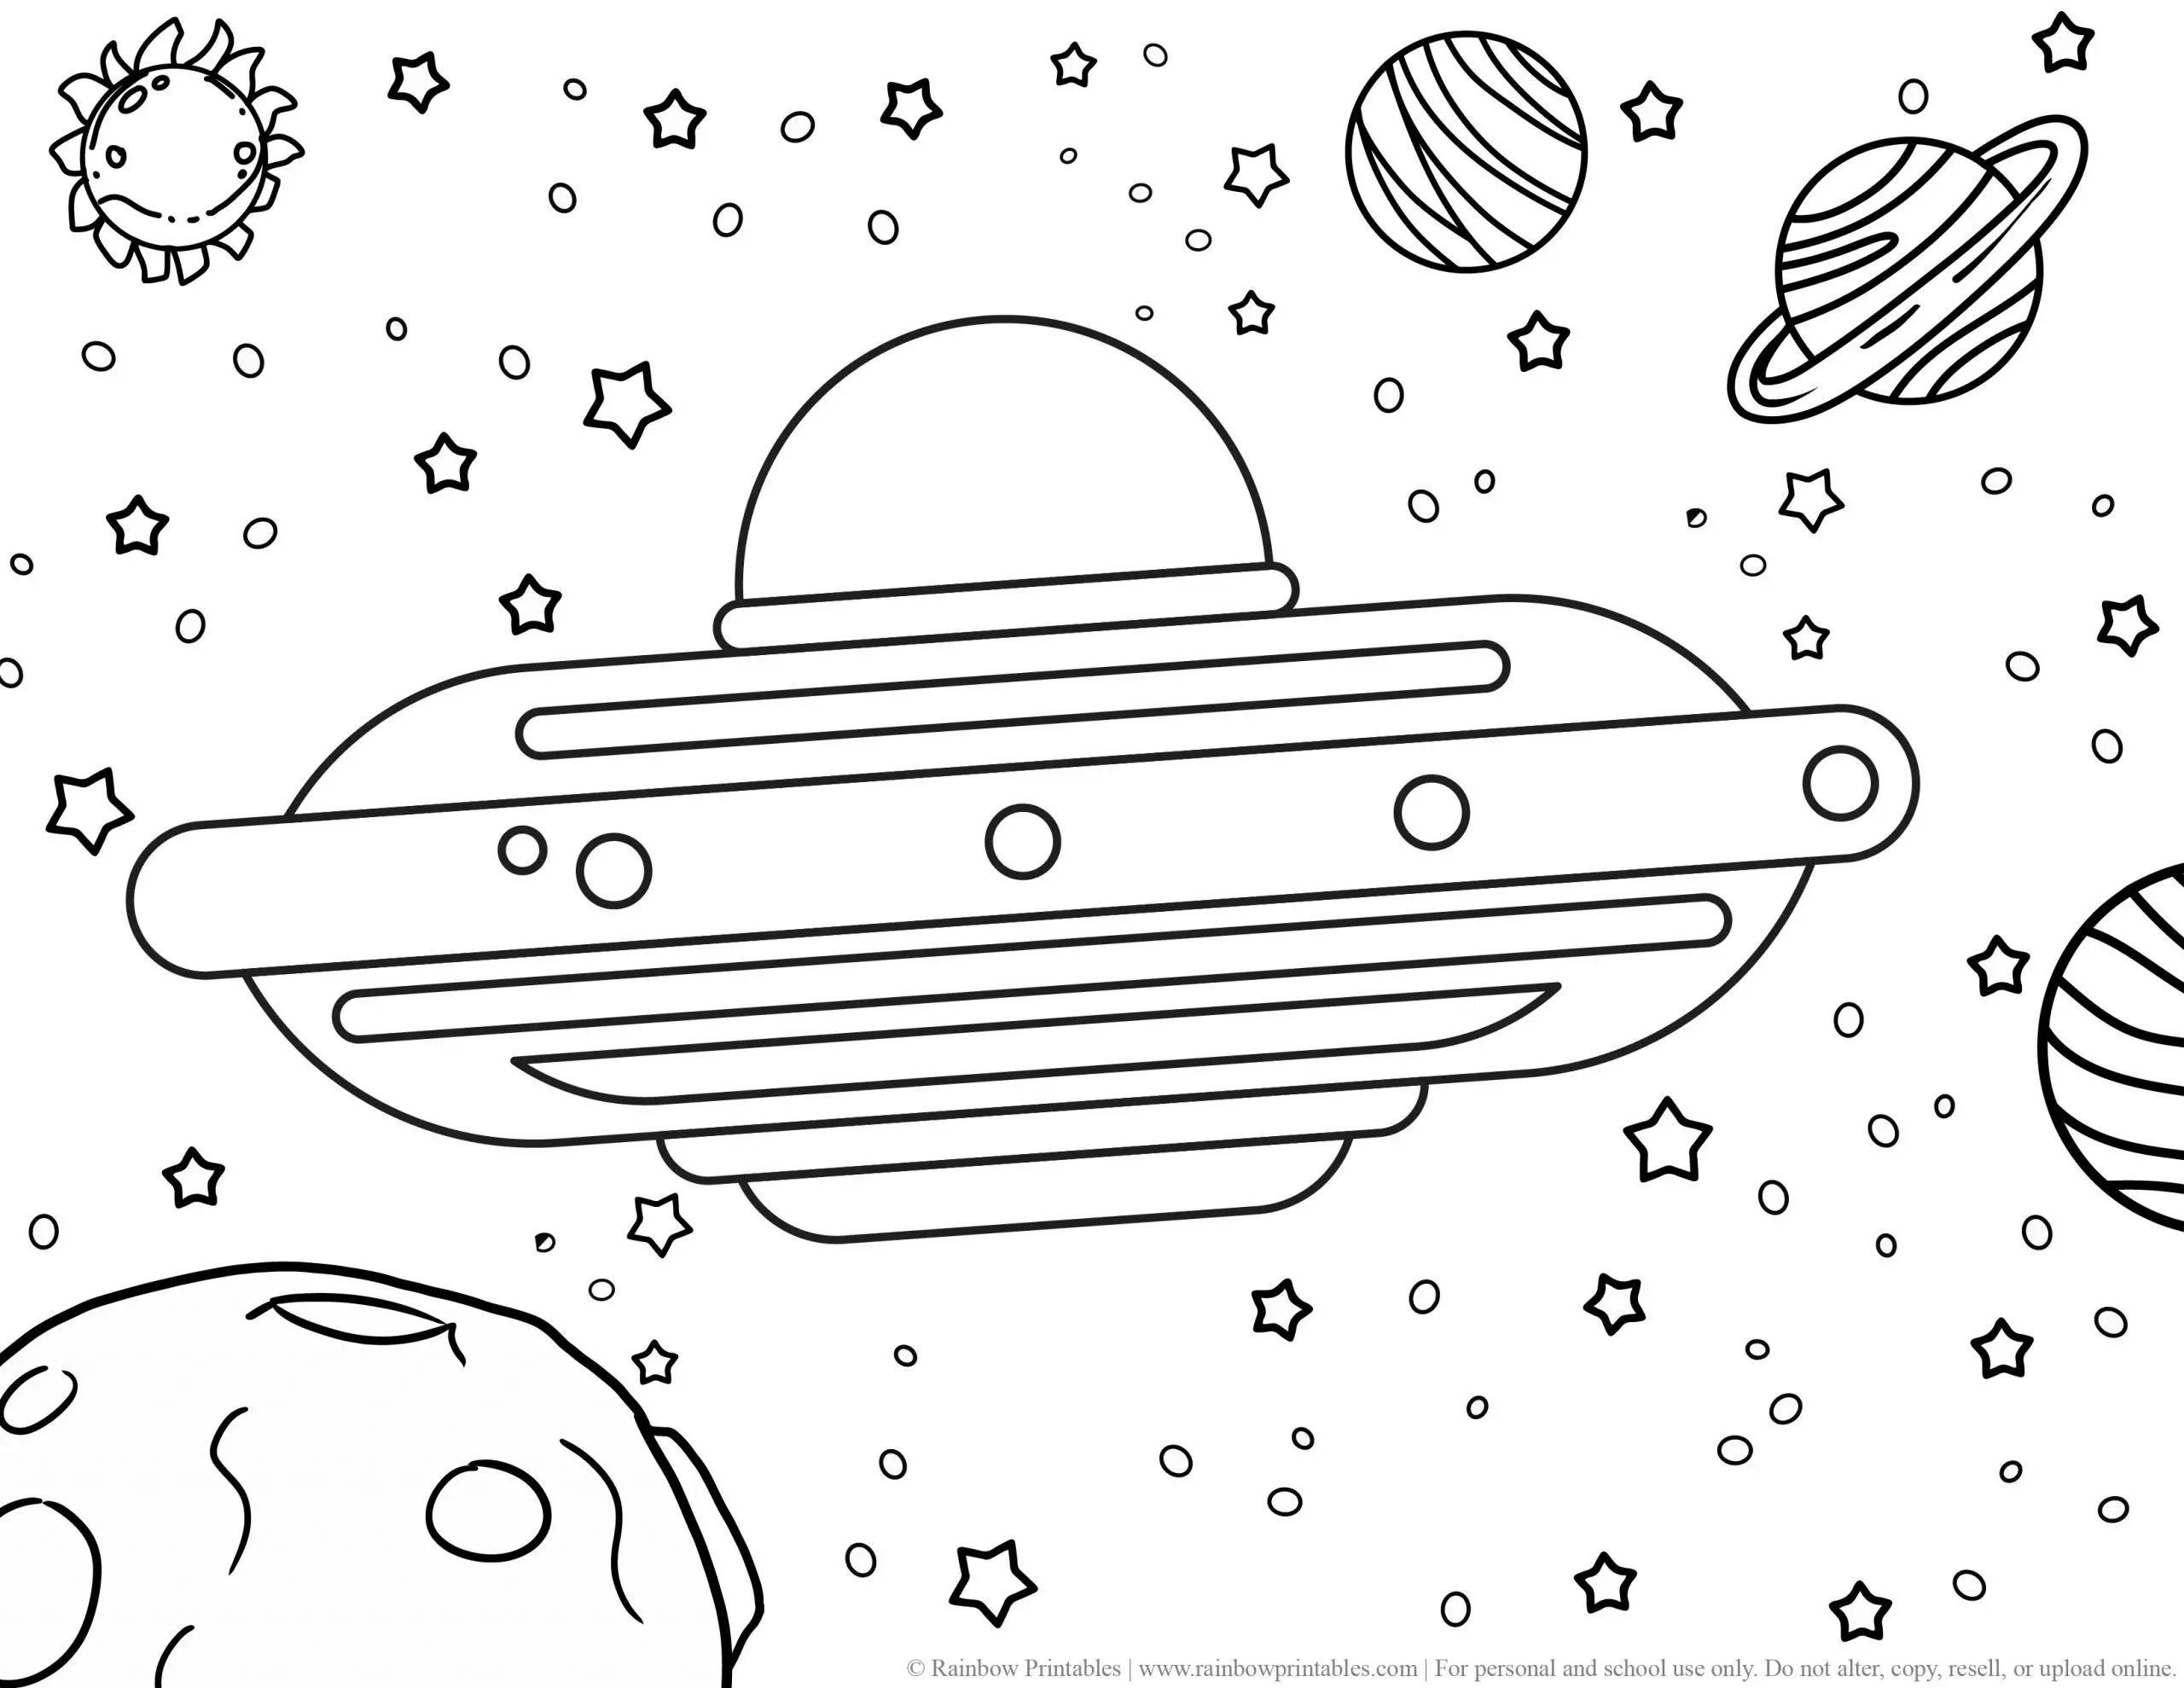 UFO Alien Planets Stars Sun Space GALAXY OUTERSPACE MOON Coloring Pages